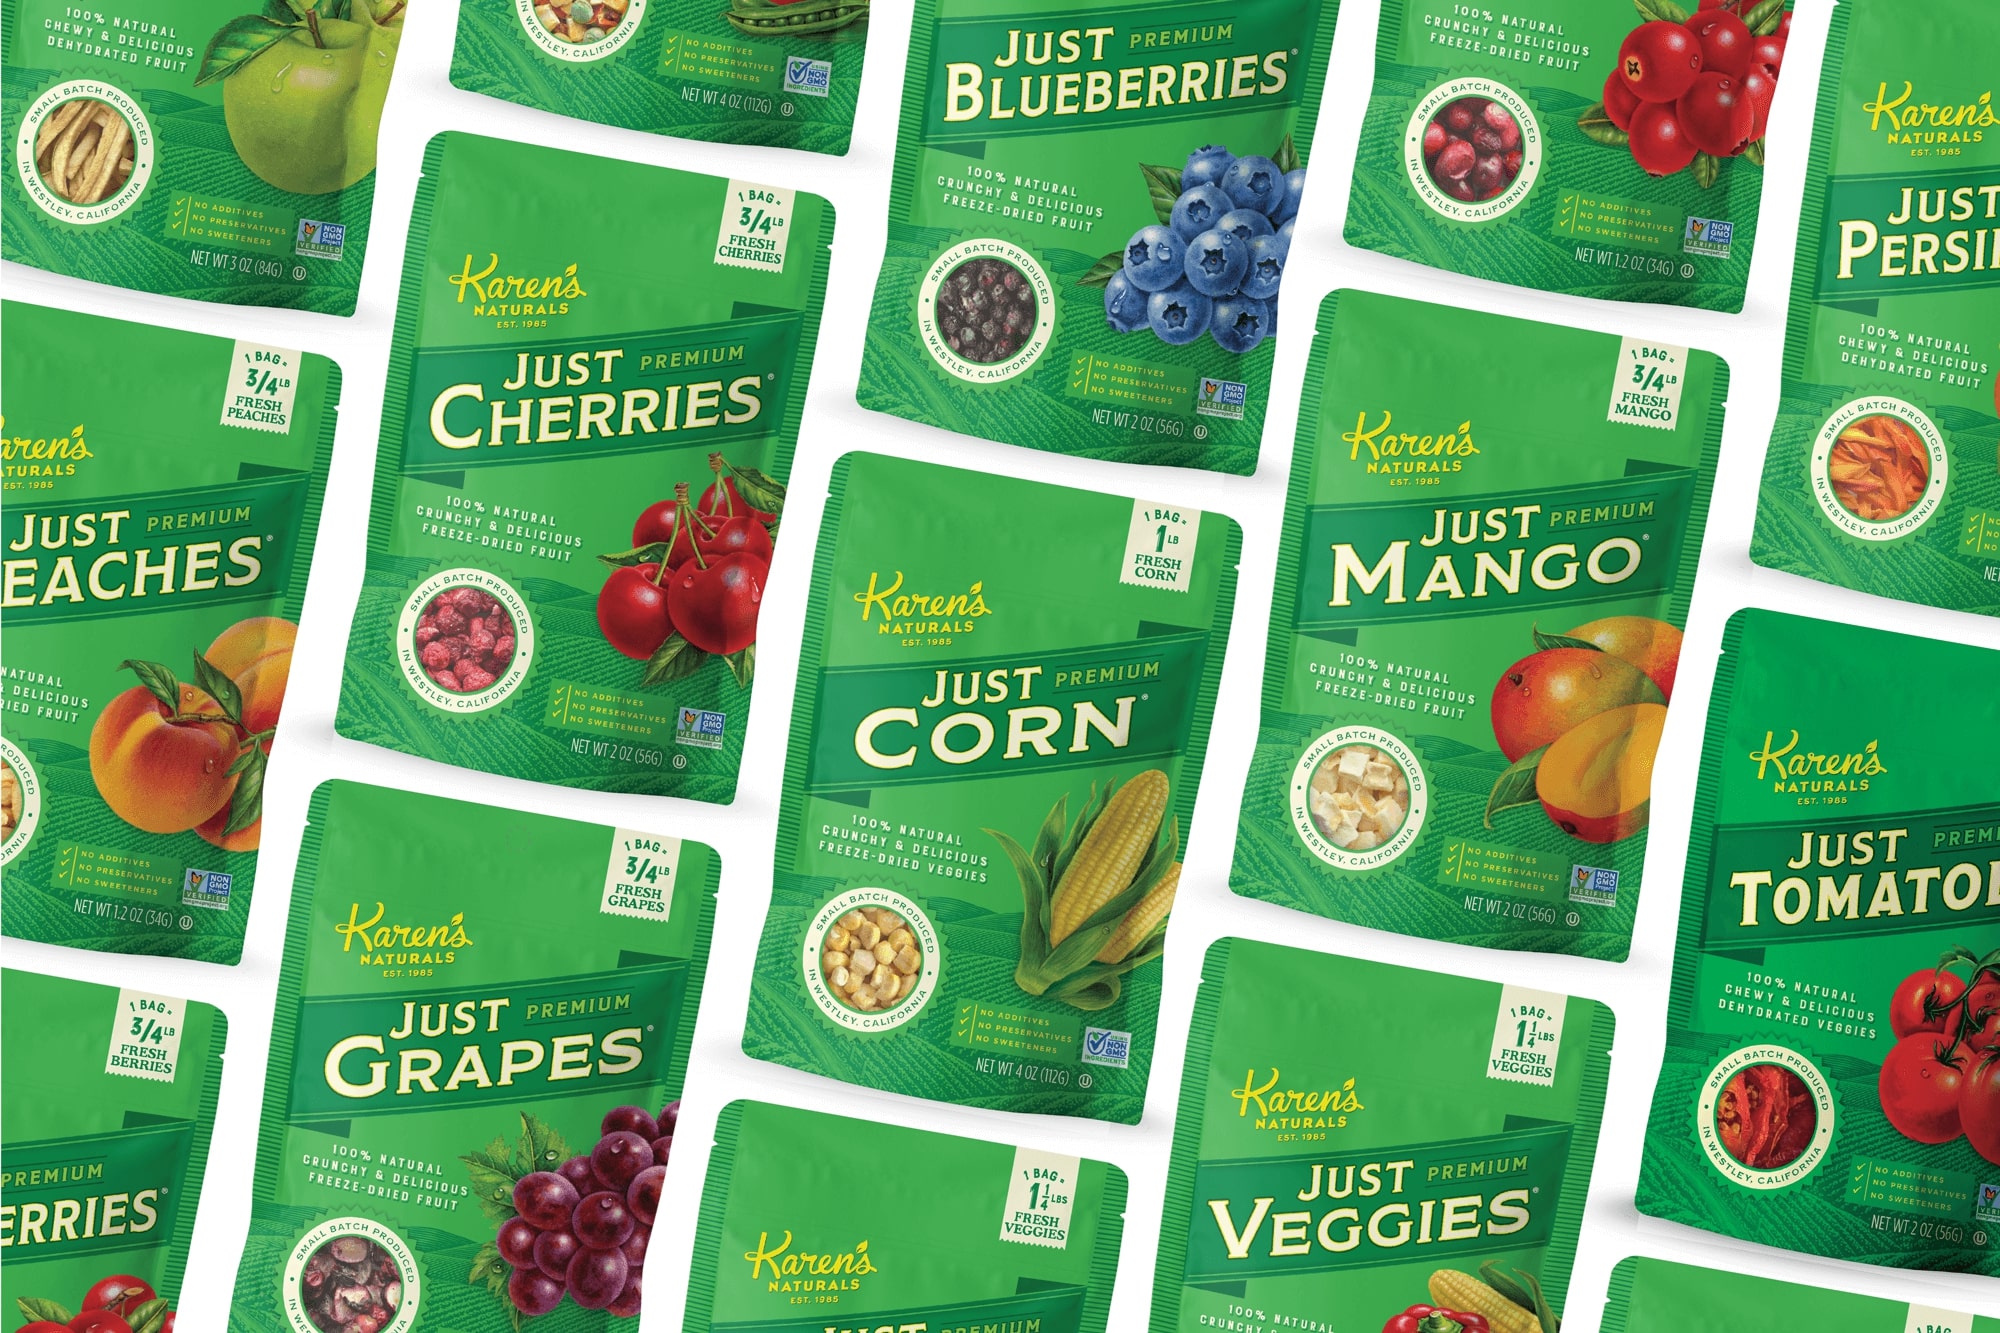 Karen's Naturals new packaging. Lot's fo California produce: cherry, blueberry, peaches, grapes, corn, mango, tomatoes, apple  